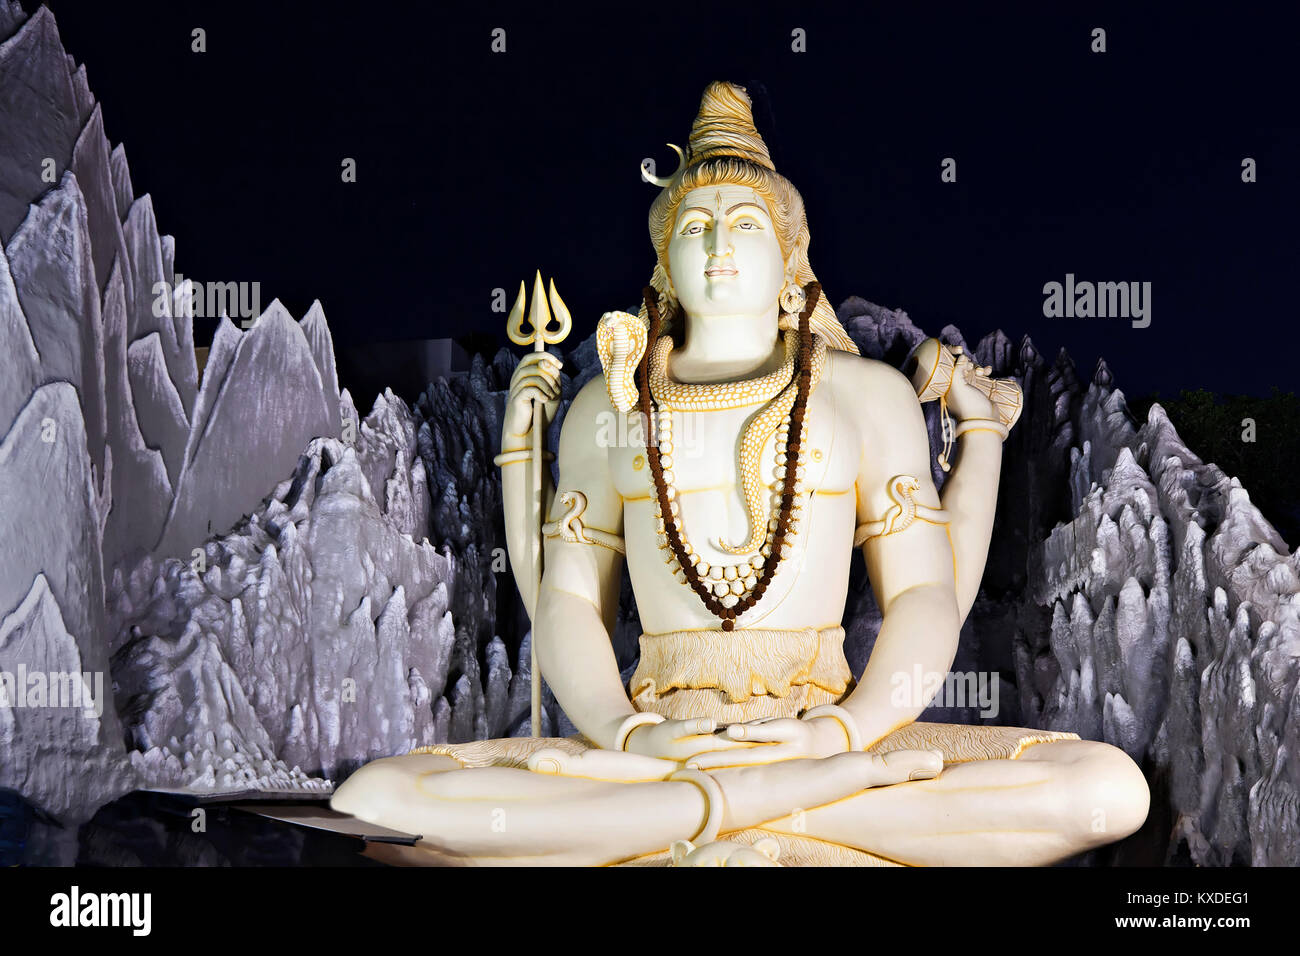 BANGALORE, INDIA - MARCH 27: Big Lord Shiva statue sitting in lotus with trident on March 27, 2012 in Bangalore, India. This Shiva Statue is highest i Stock Photo